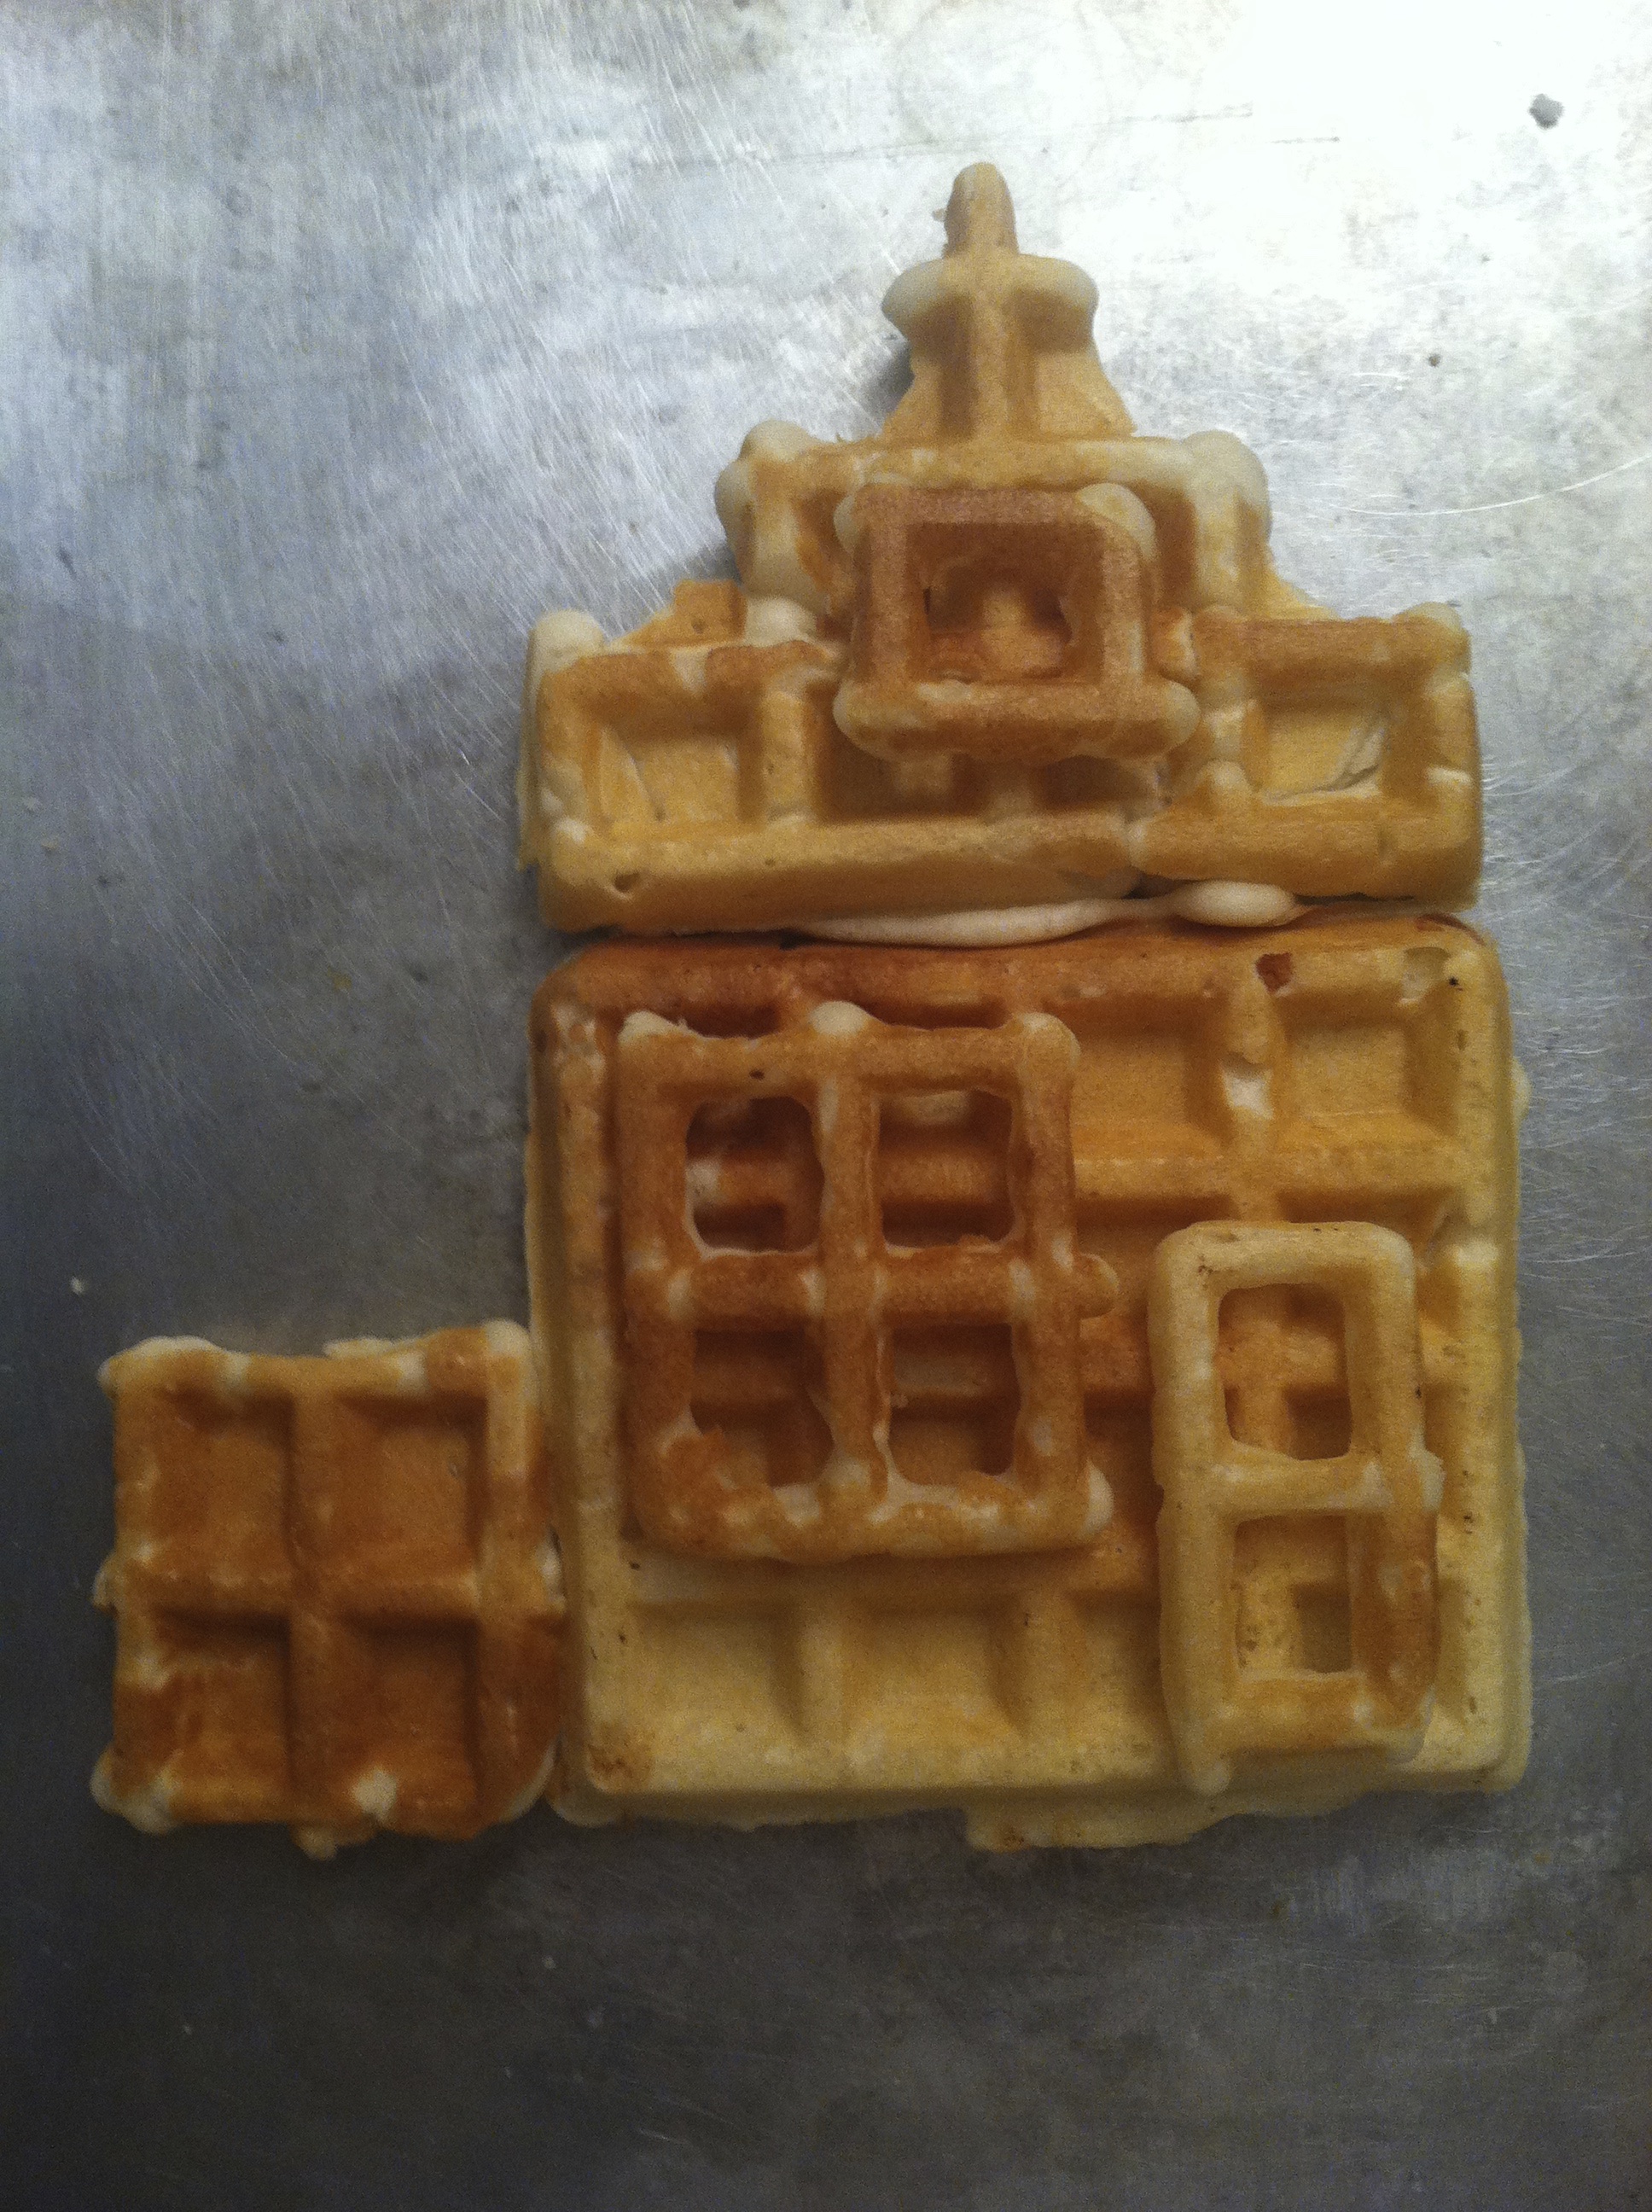 The Easy Way to Clean Your Waffle Iron - TheMamasGirls